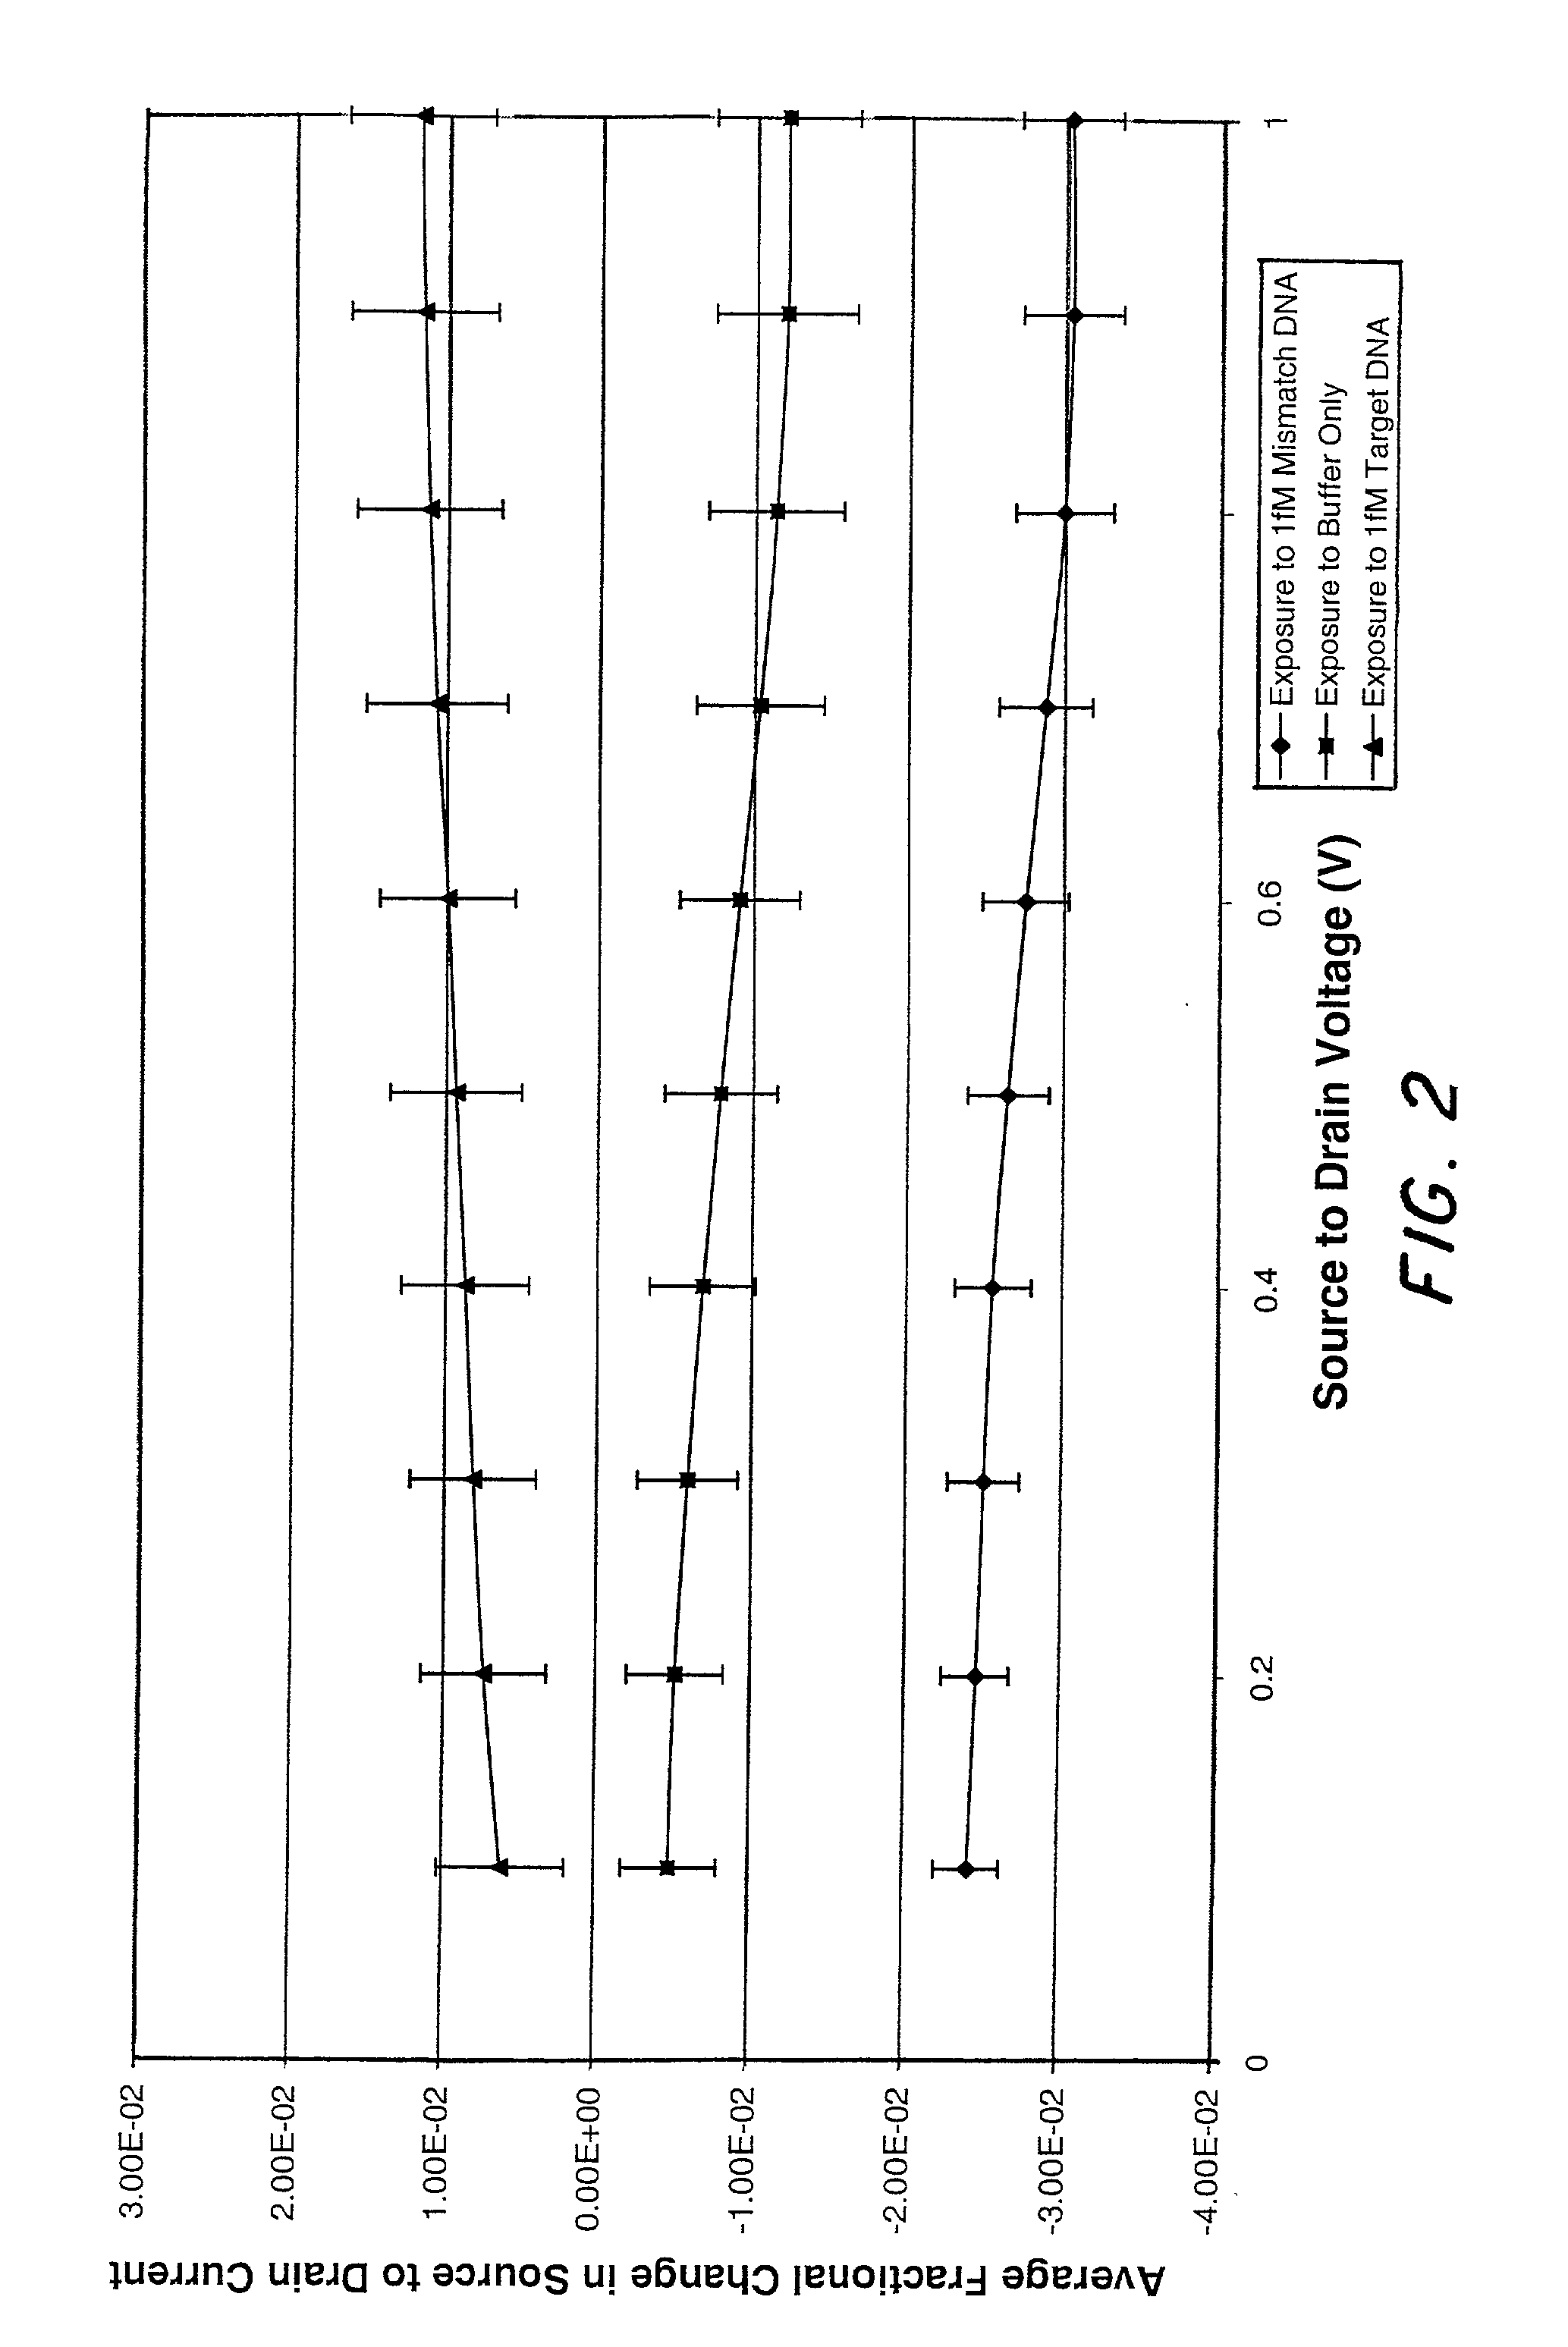 Microelectronic device and method for label-free detection and quantification of biological and chemical molecules